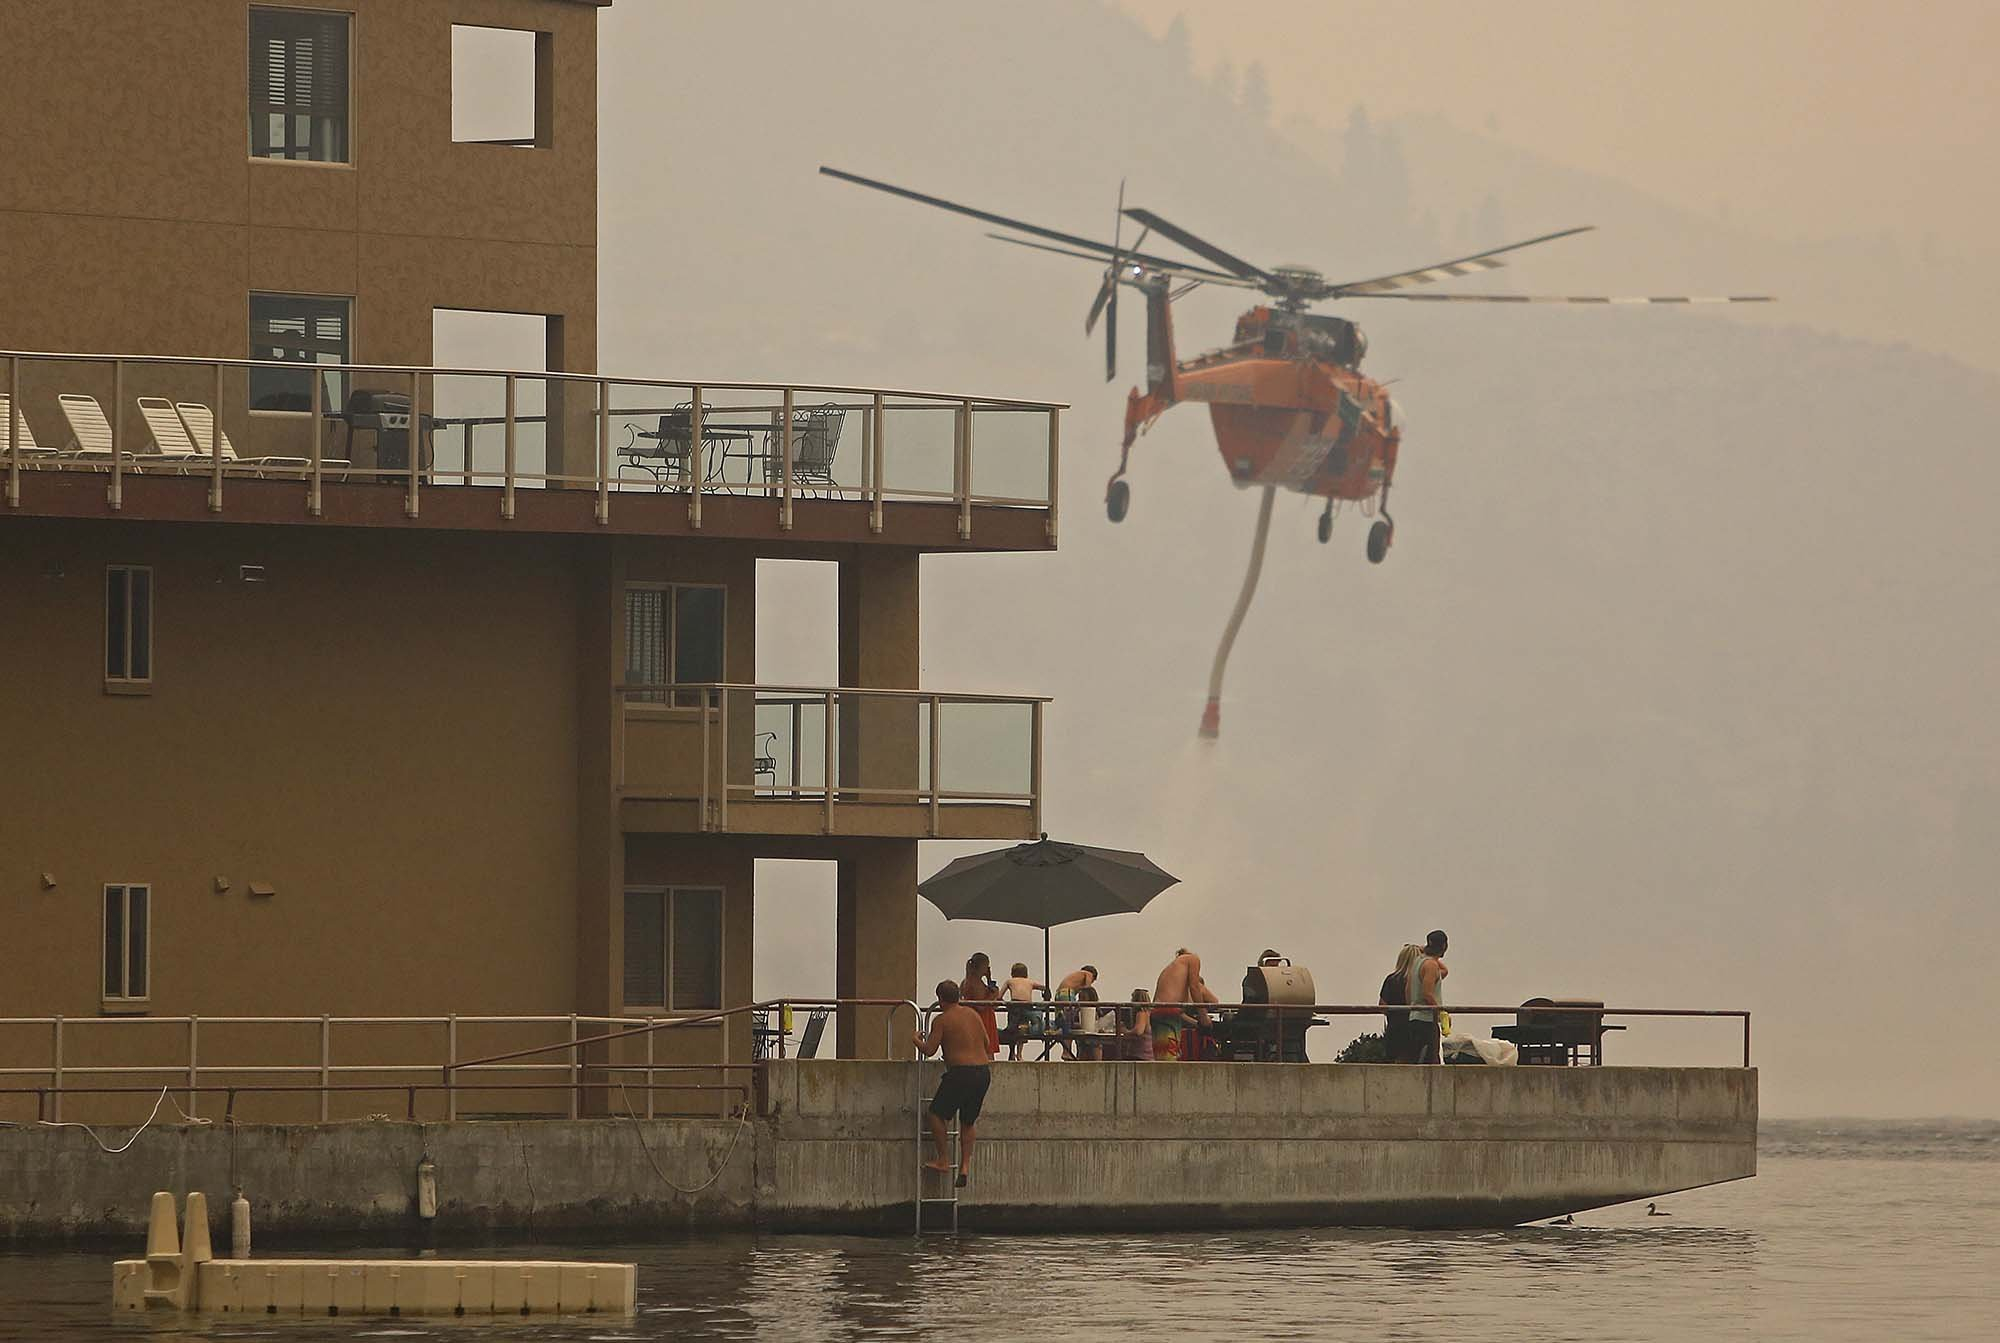  An Erickson Air Crane loads up water on Lake Chelan in as guests at the Grandview On the Lake barbecue, Saturday, Aug. 15, 2015, in Chelan, Wash. 